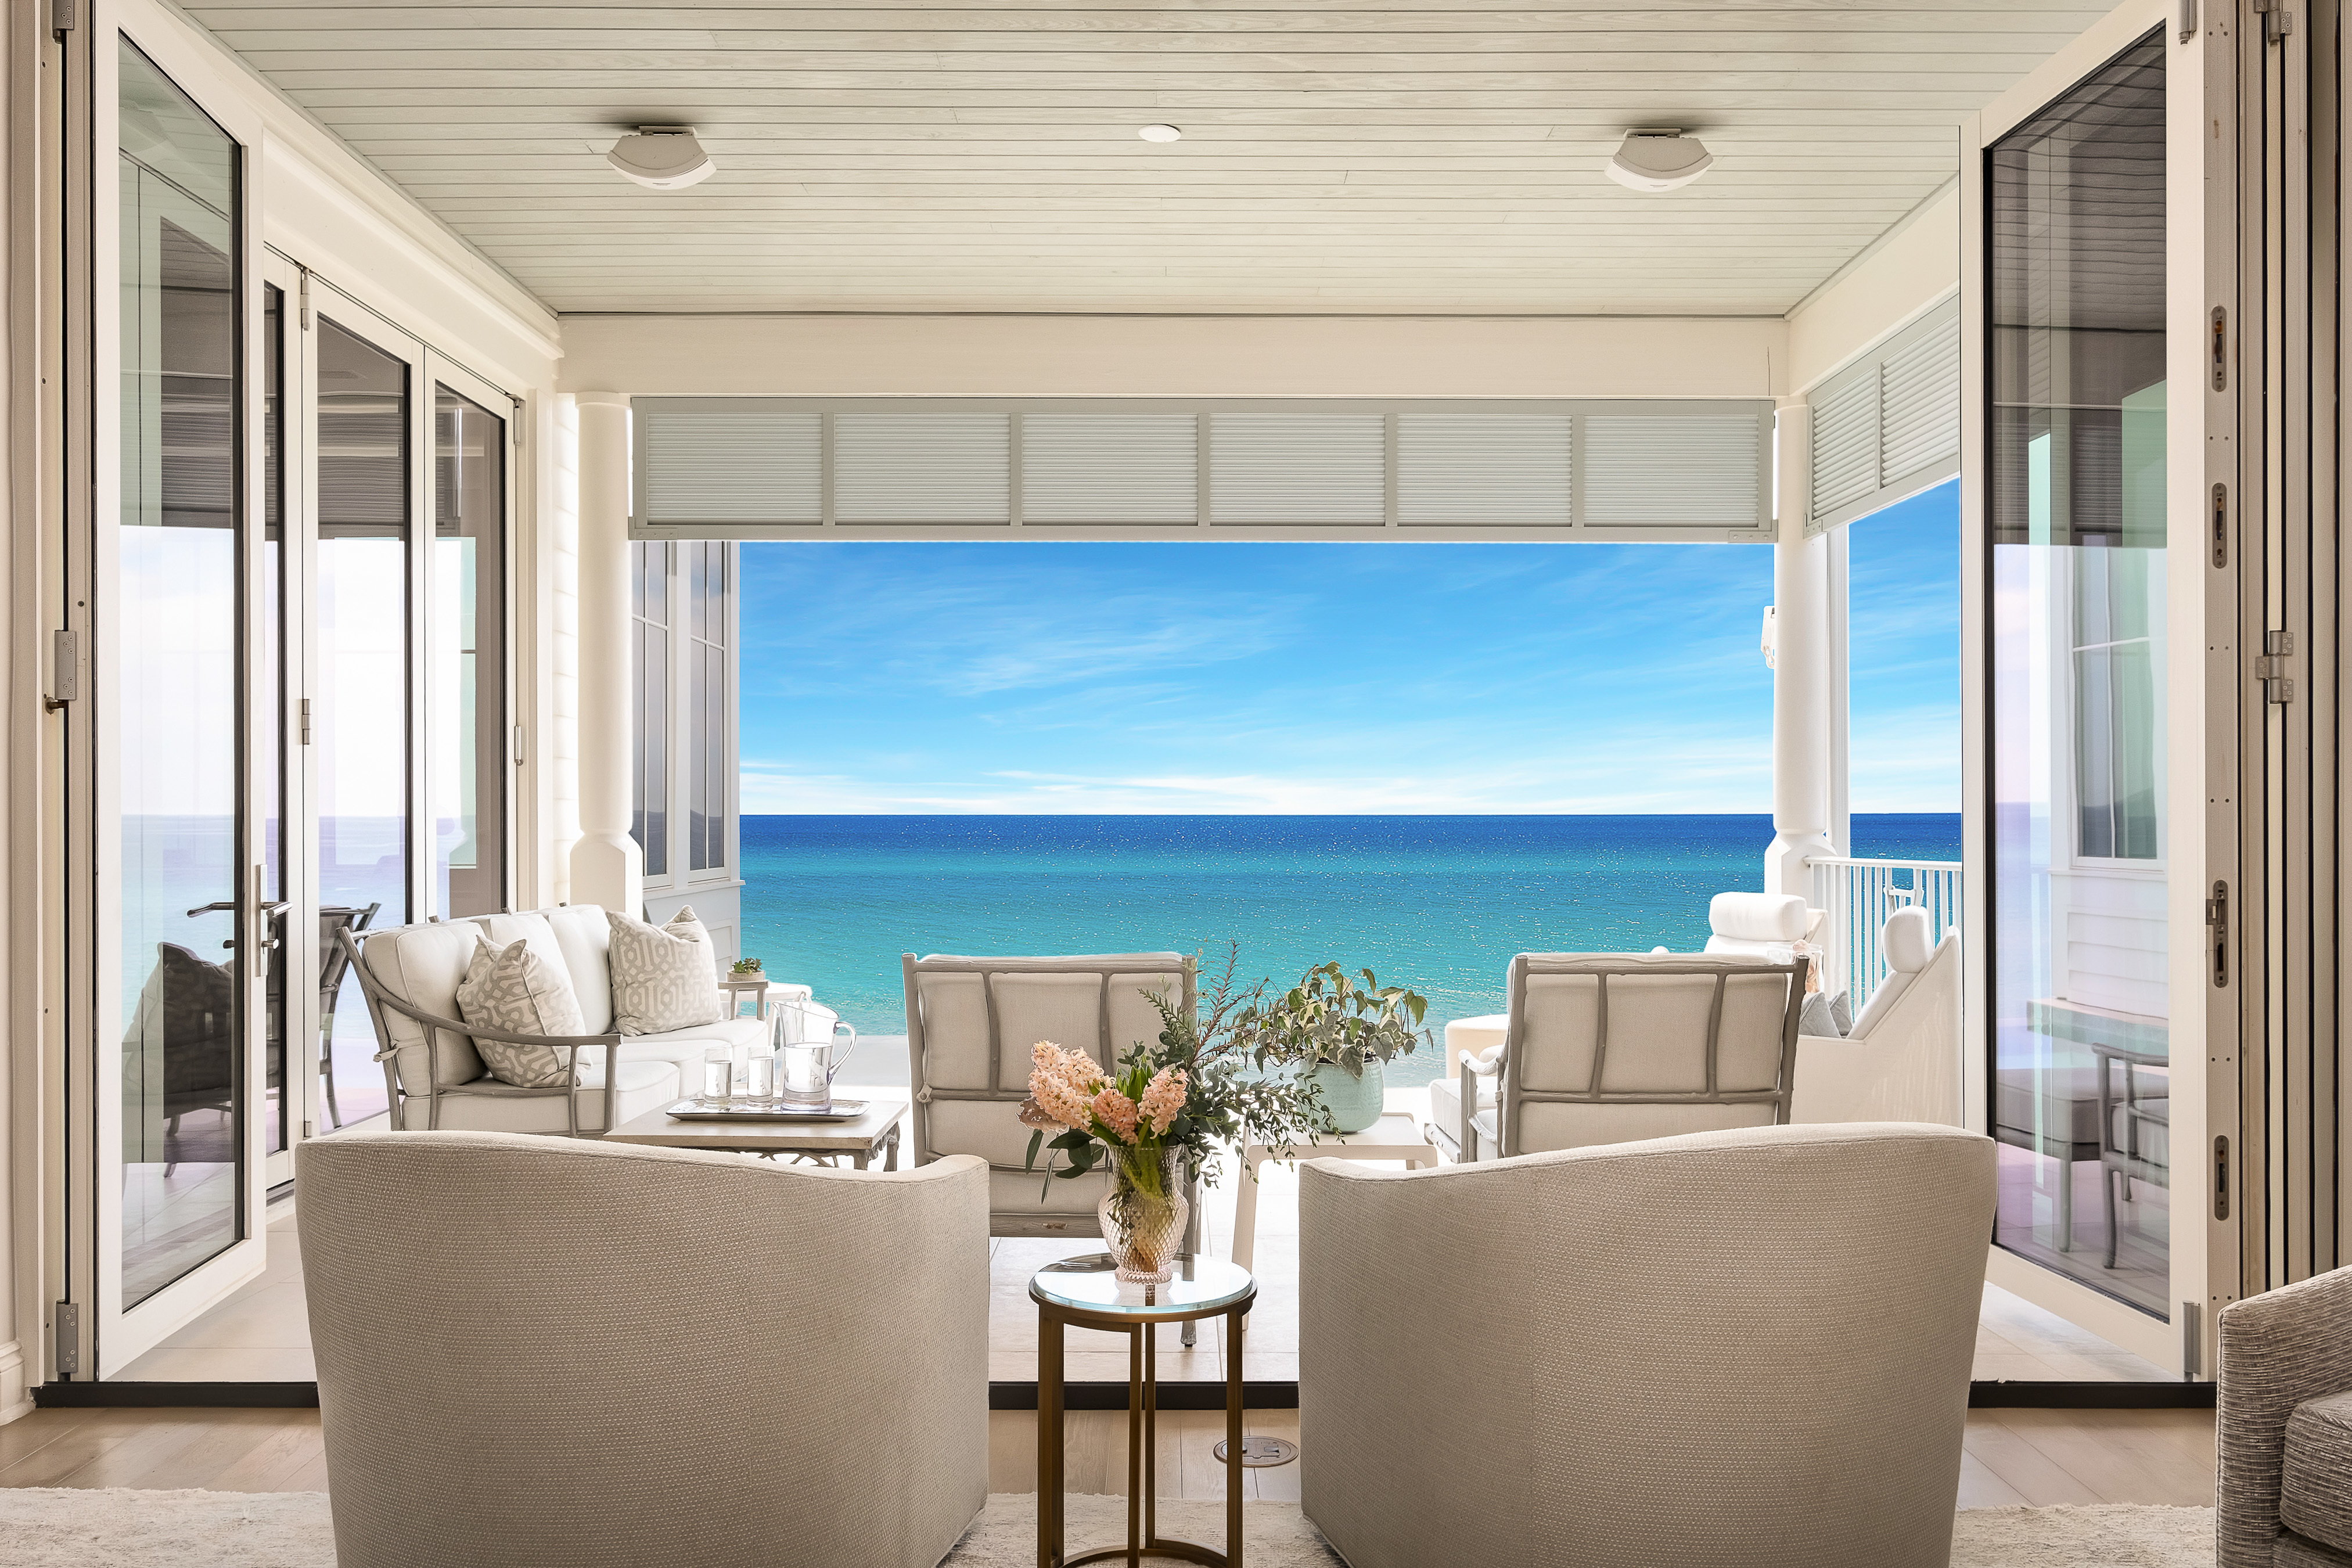 Picturesque view of the gulf waters from a gulf front luxury home's open balcony sitting area